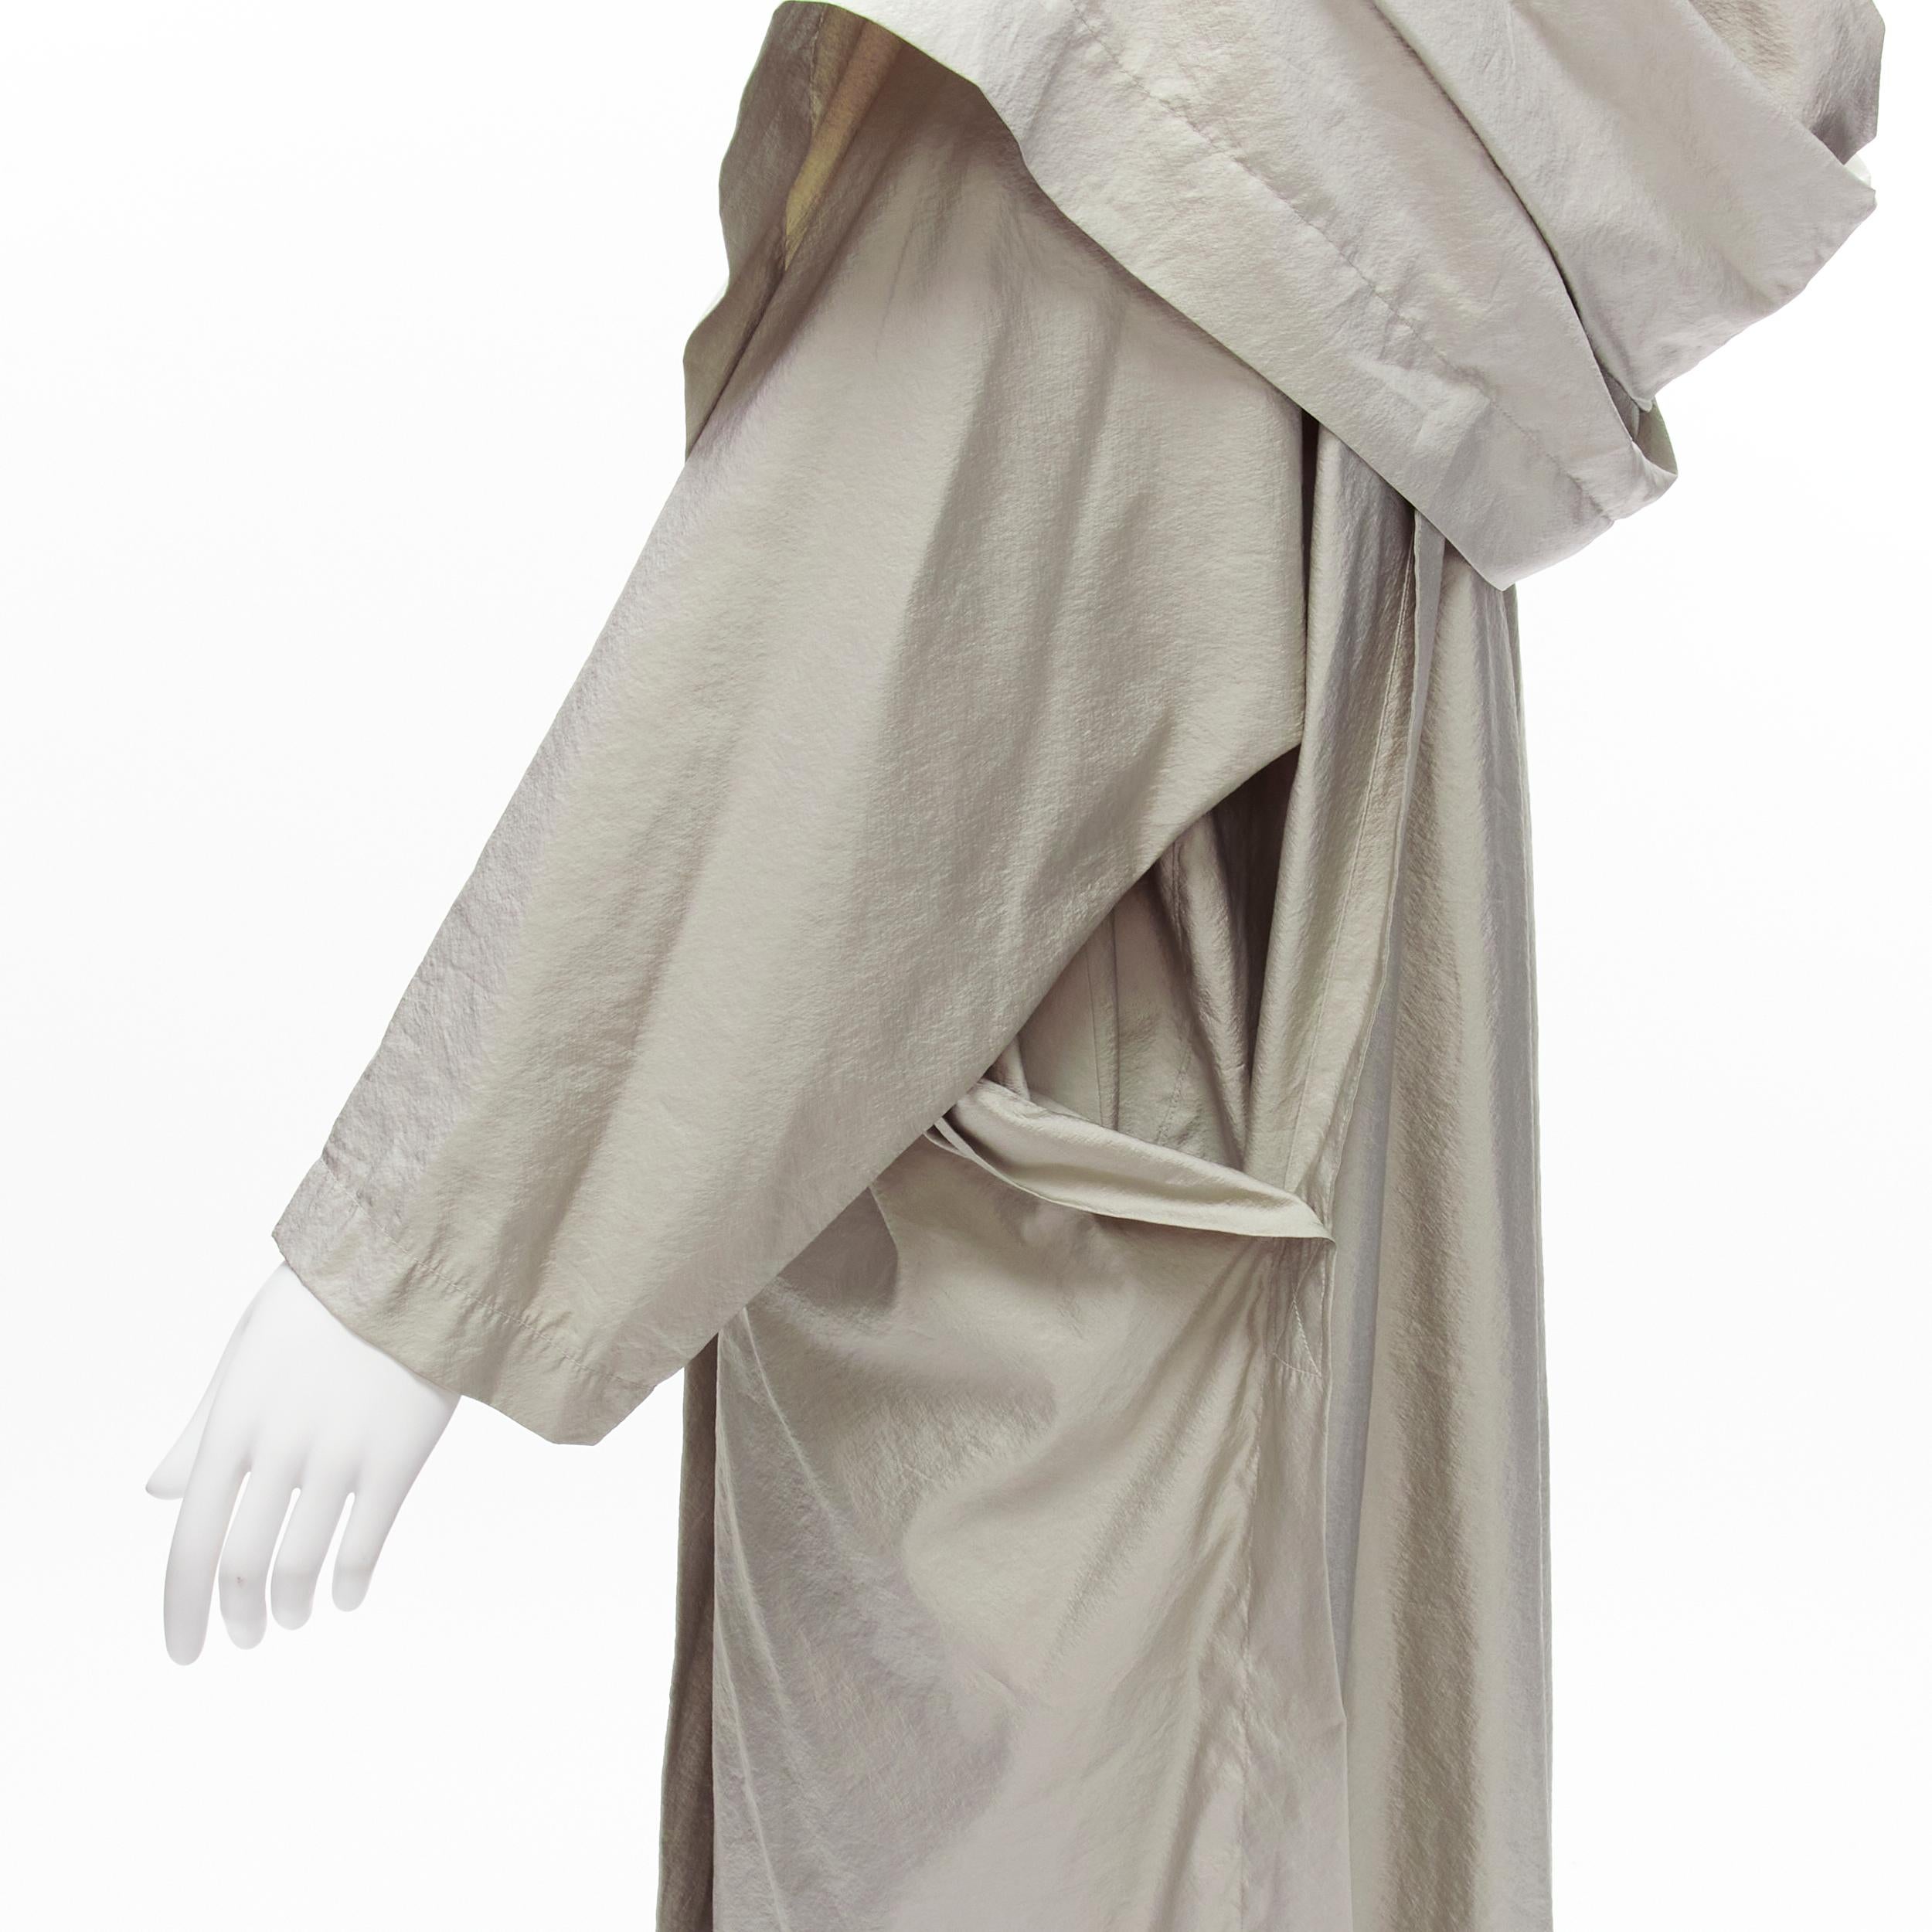 ISSEY MIYAKE 1986 Vintage Runway light grey lucid hooded sleeve layer draped overcoat JP9 M
Reference: TGAS/D00176
Brand: Issey Miyake
Collection: Spring 1986
Material: Polyester, Nylon
Color: Grey
Pattern: Solid
Closure: Button
Made in: